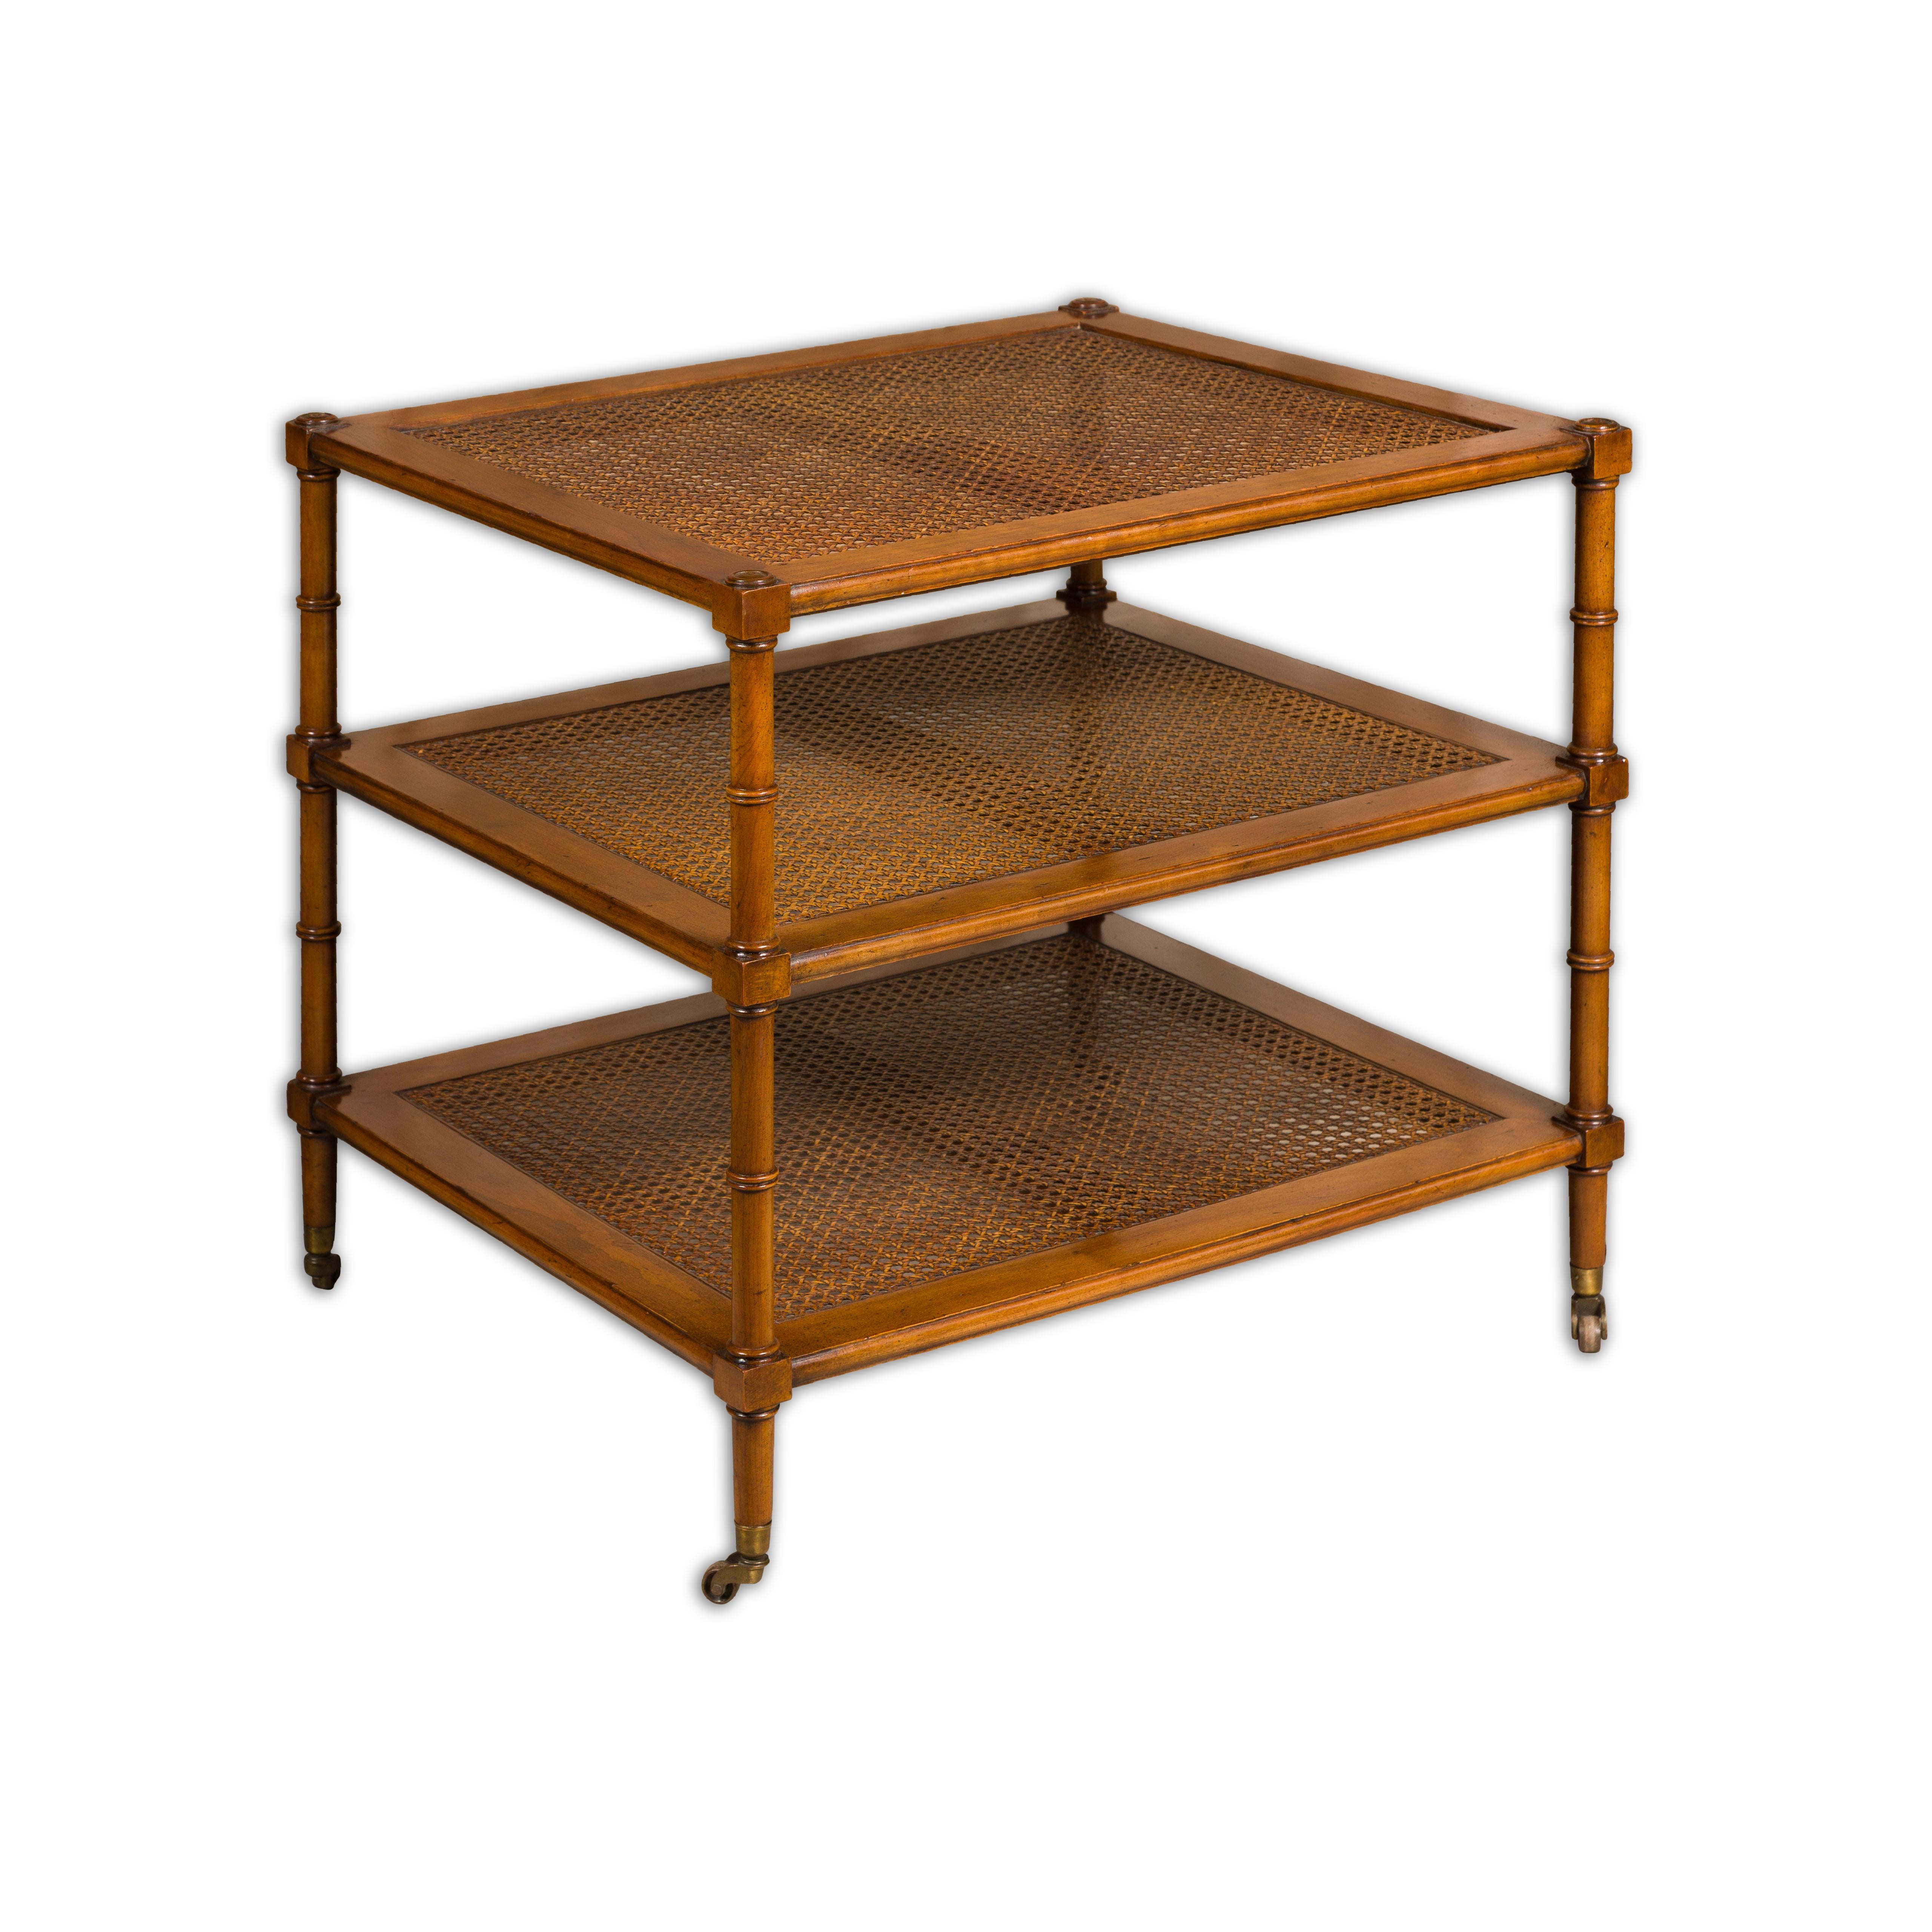 An English faux bamboo tiered table on casters with three cane shelves and casters. This English faux bamboo tiered table on casters is a delightful blend of style and functionality. Its charming design draws inspiration from the classic bamboo